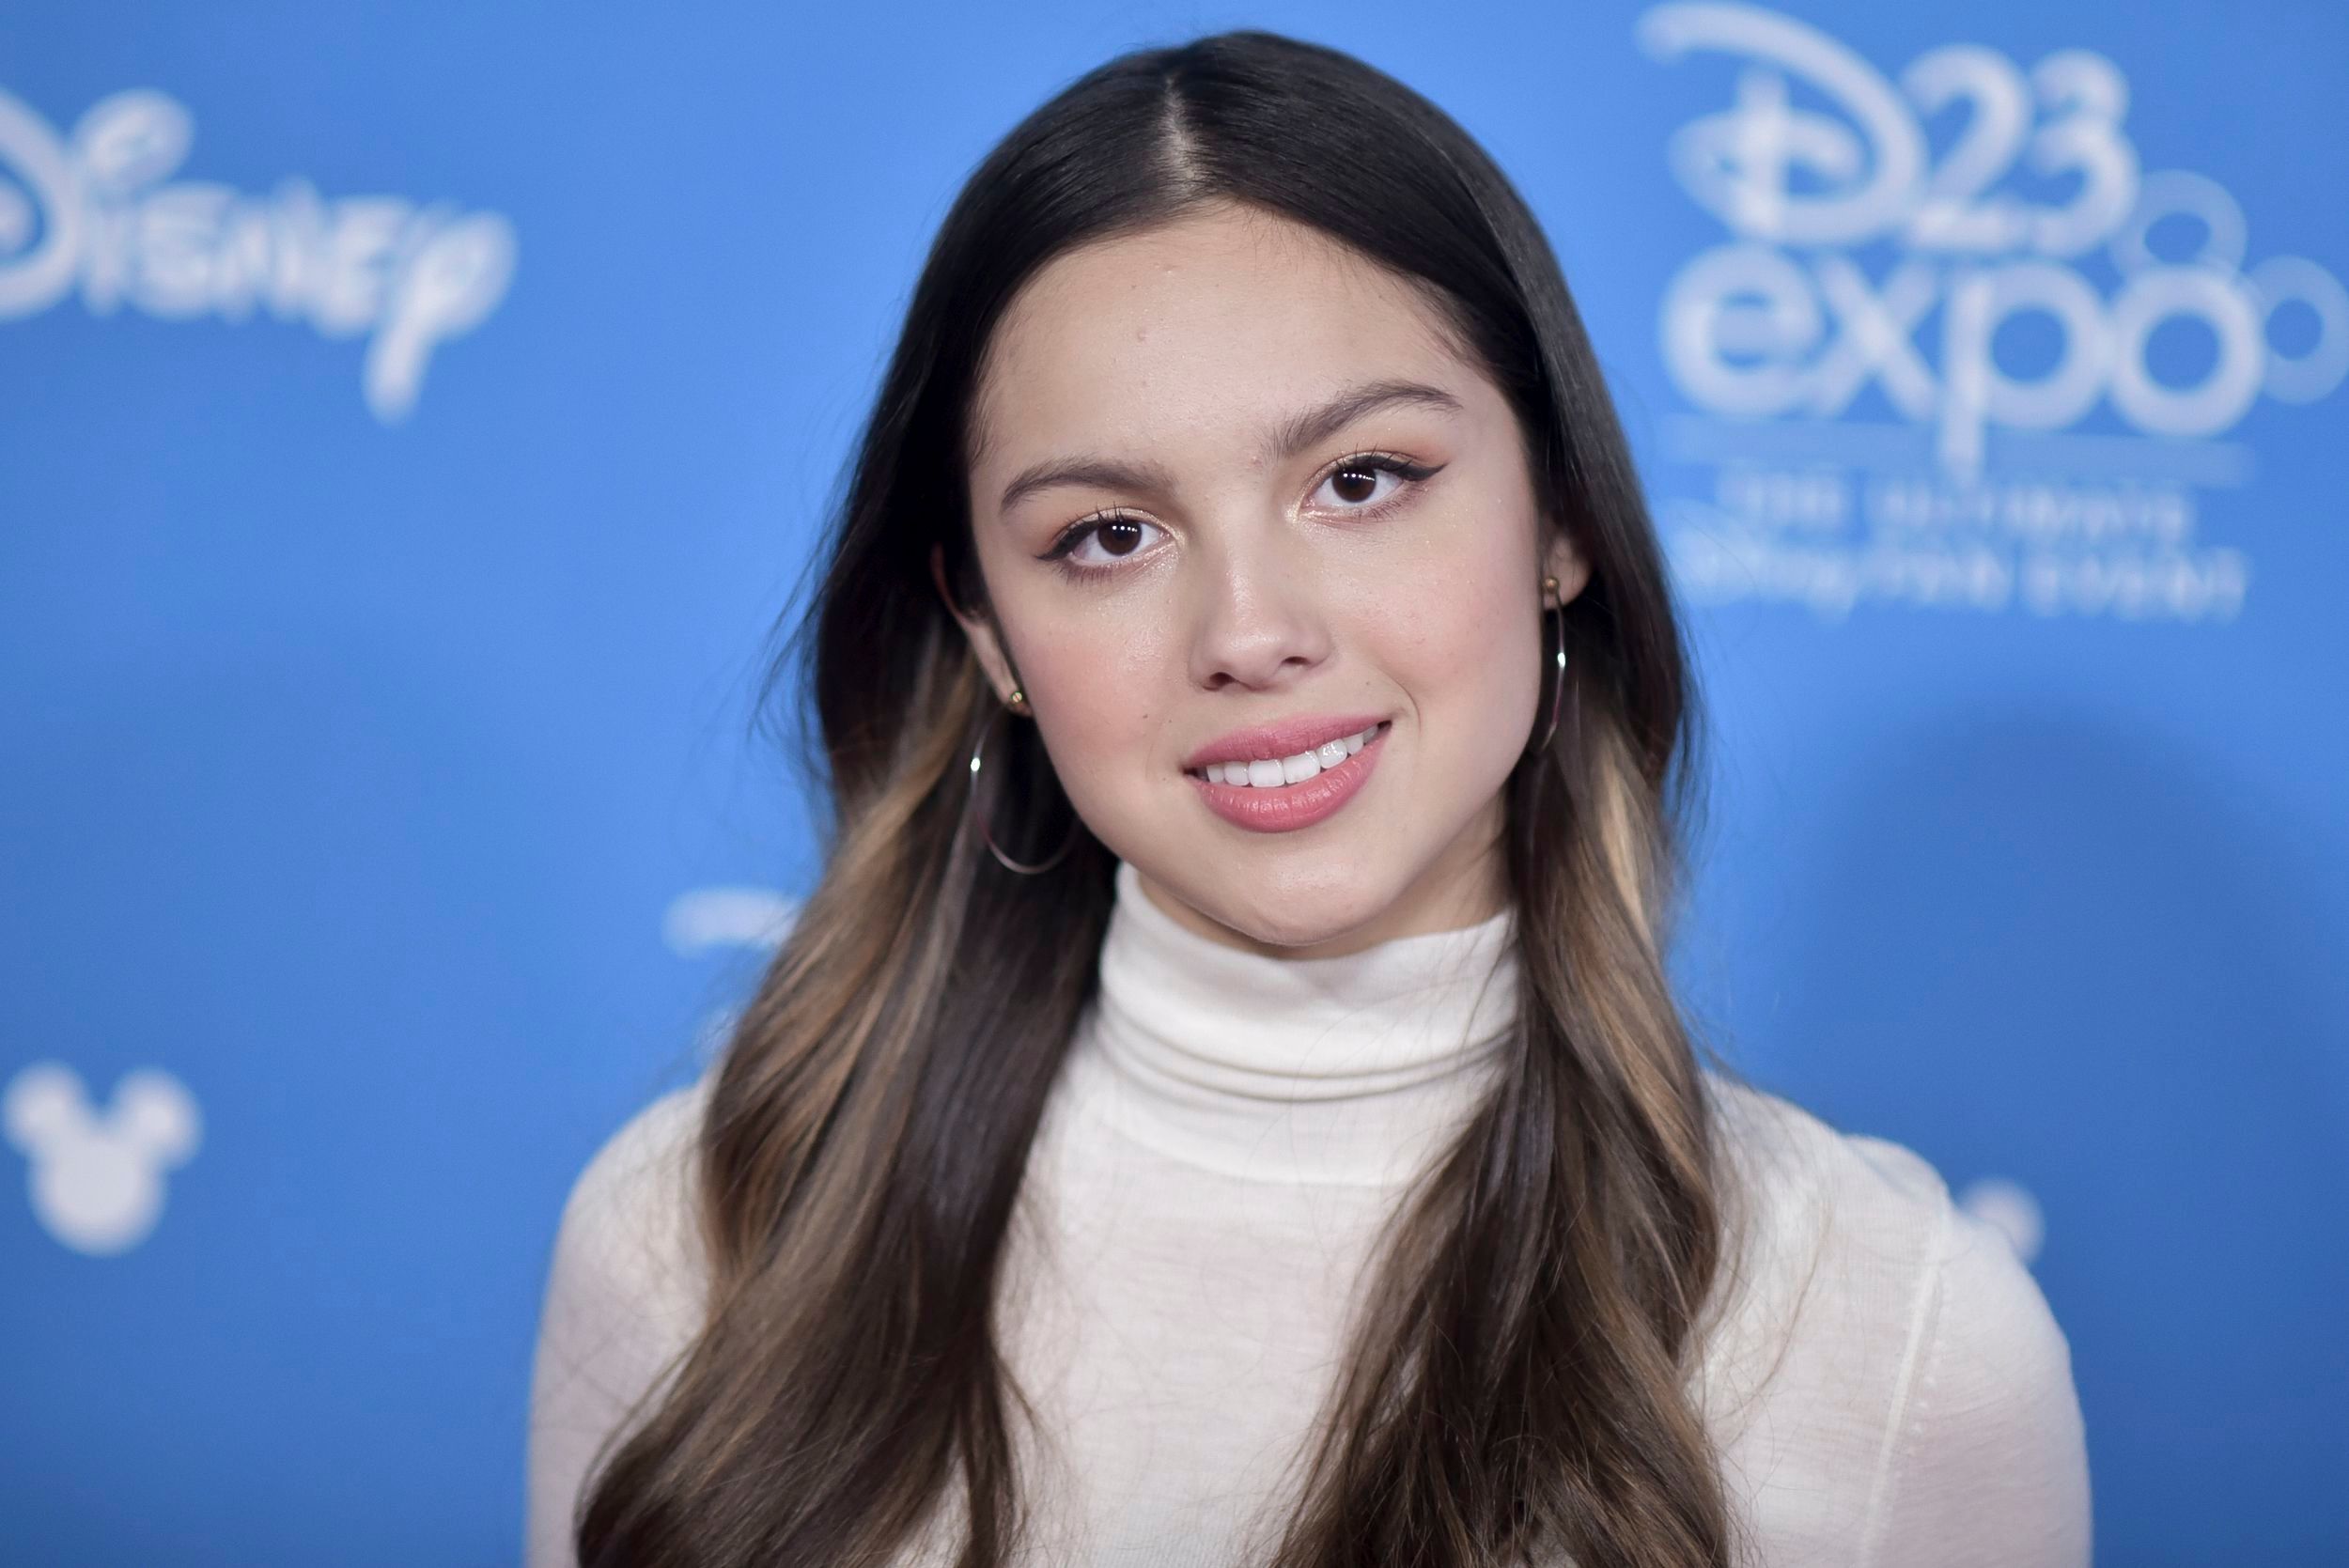 Who Is Olivia Rodrigo? Facts About the Actress and Singer